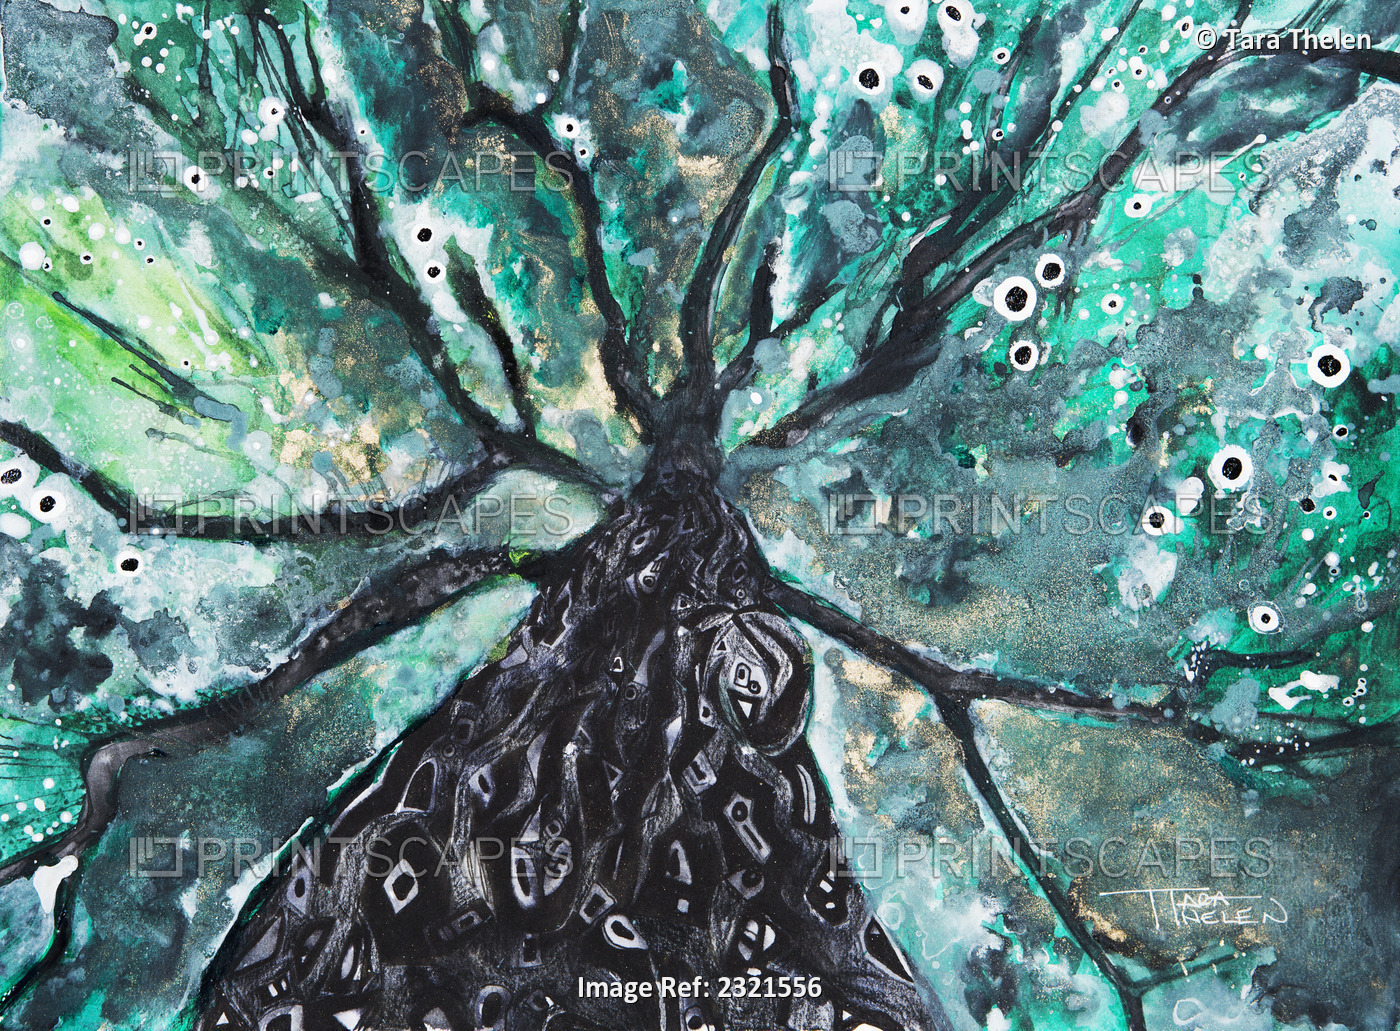 Abstract Watercolor Painting Of A Tree And Its Branches.